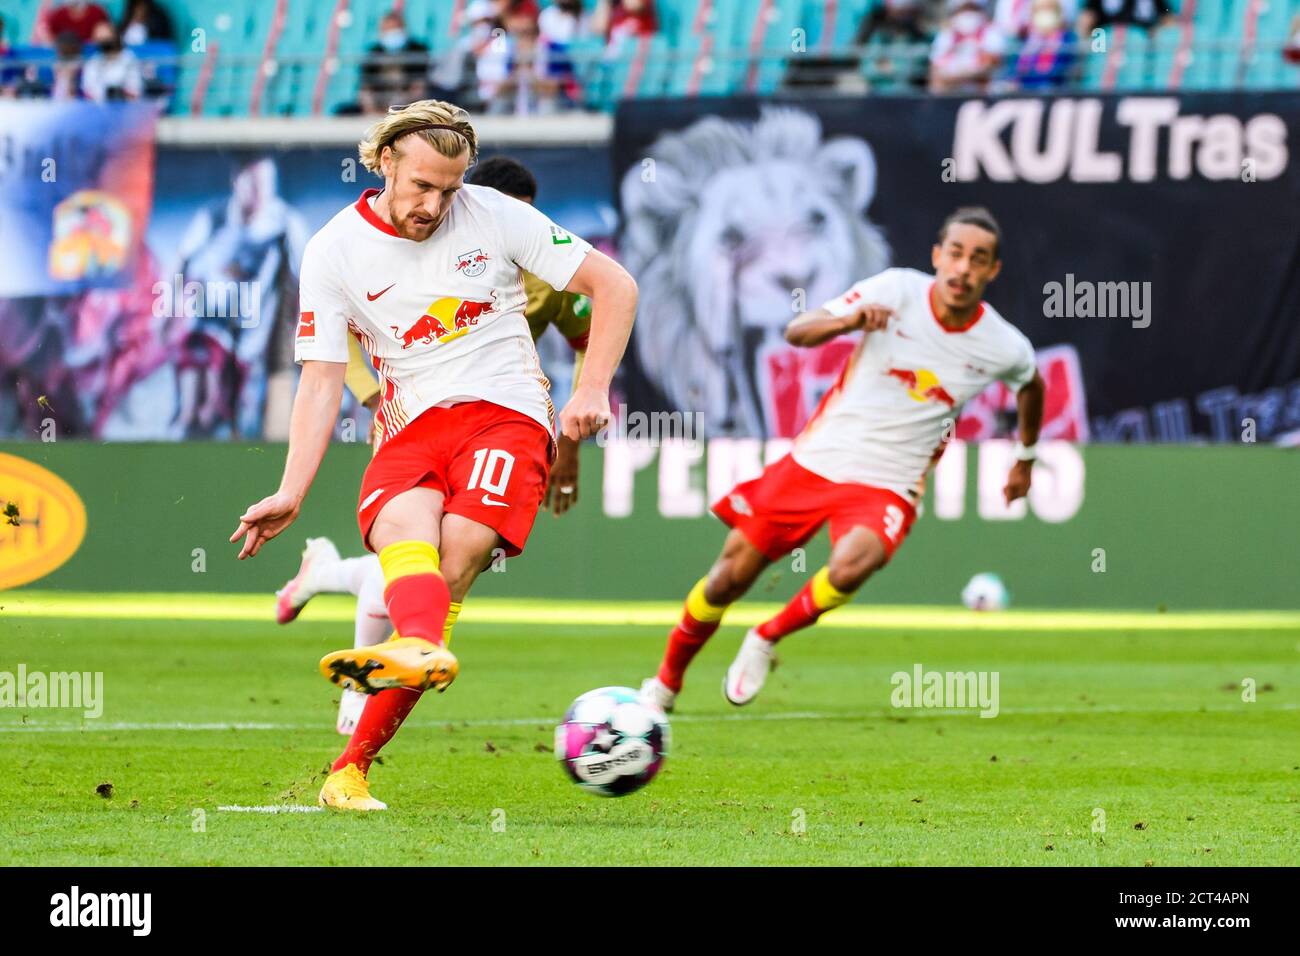 Leipzig, Germany. 20th Sep, 2020. Emil Forsberg (L) of Leipzig takes a scoring penalty shot during a German Bundesliga match between RB Leipzig and 1.FSV Mainz 05 in Leipzig, Germany, Sept. 20, 2020. Credit: Kevin Voigt/Xinhua/Alamy Live News Stock Photo